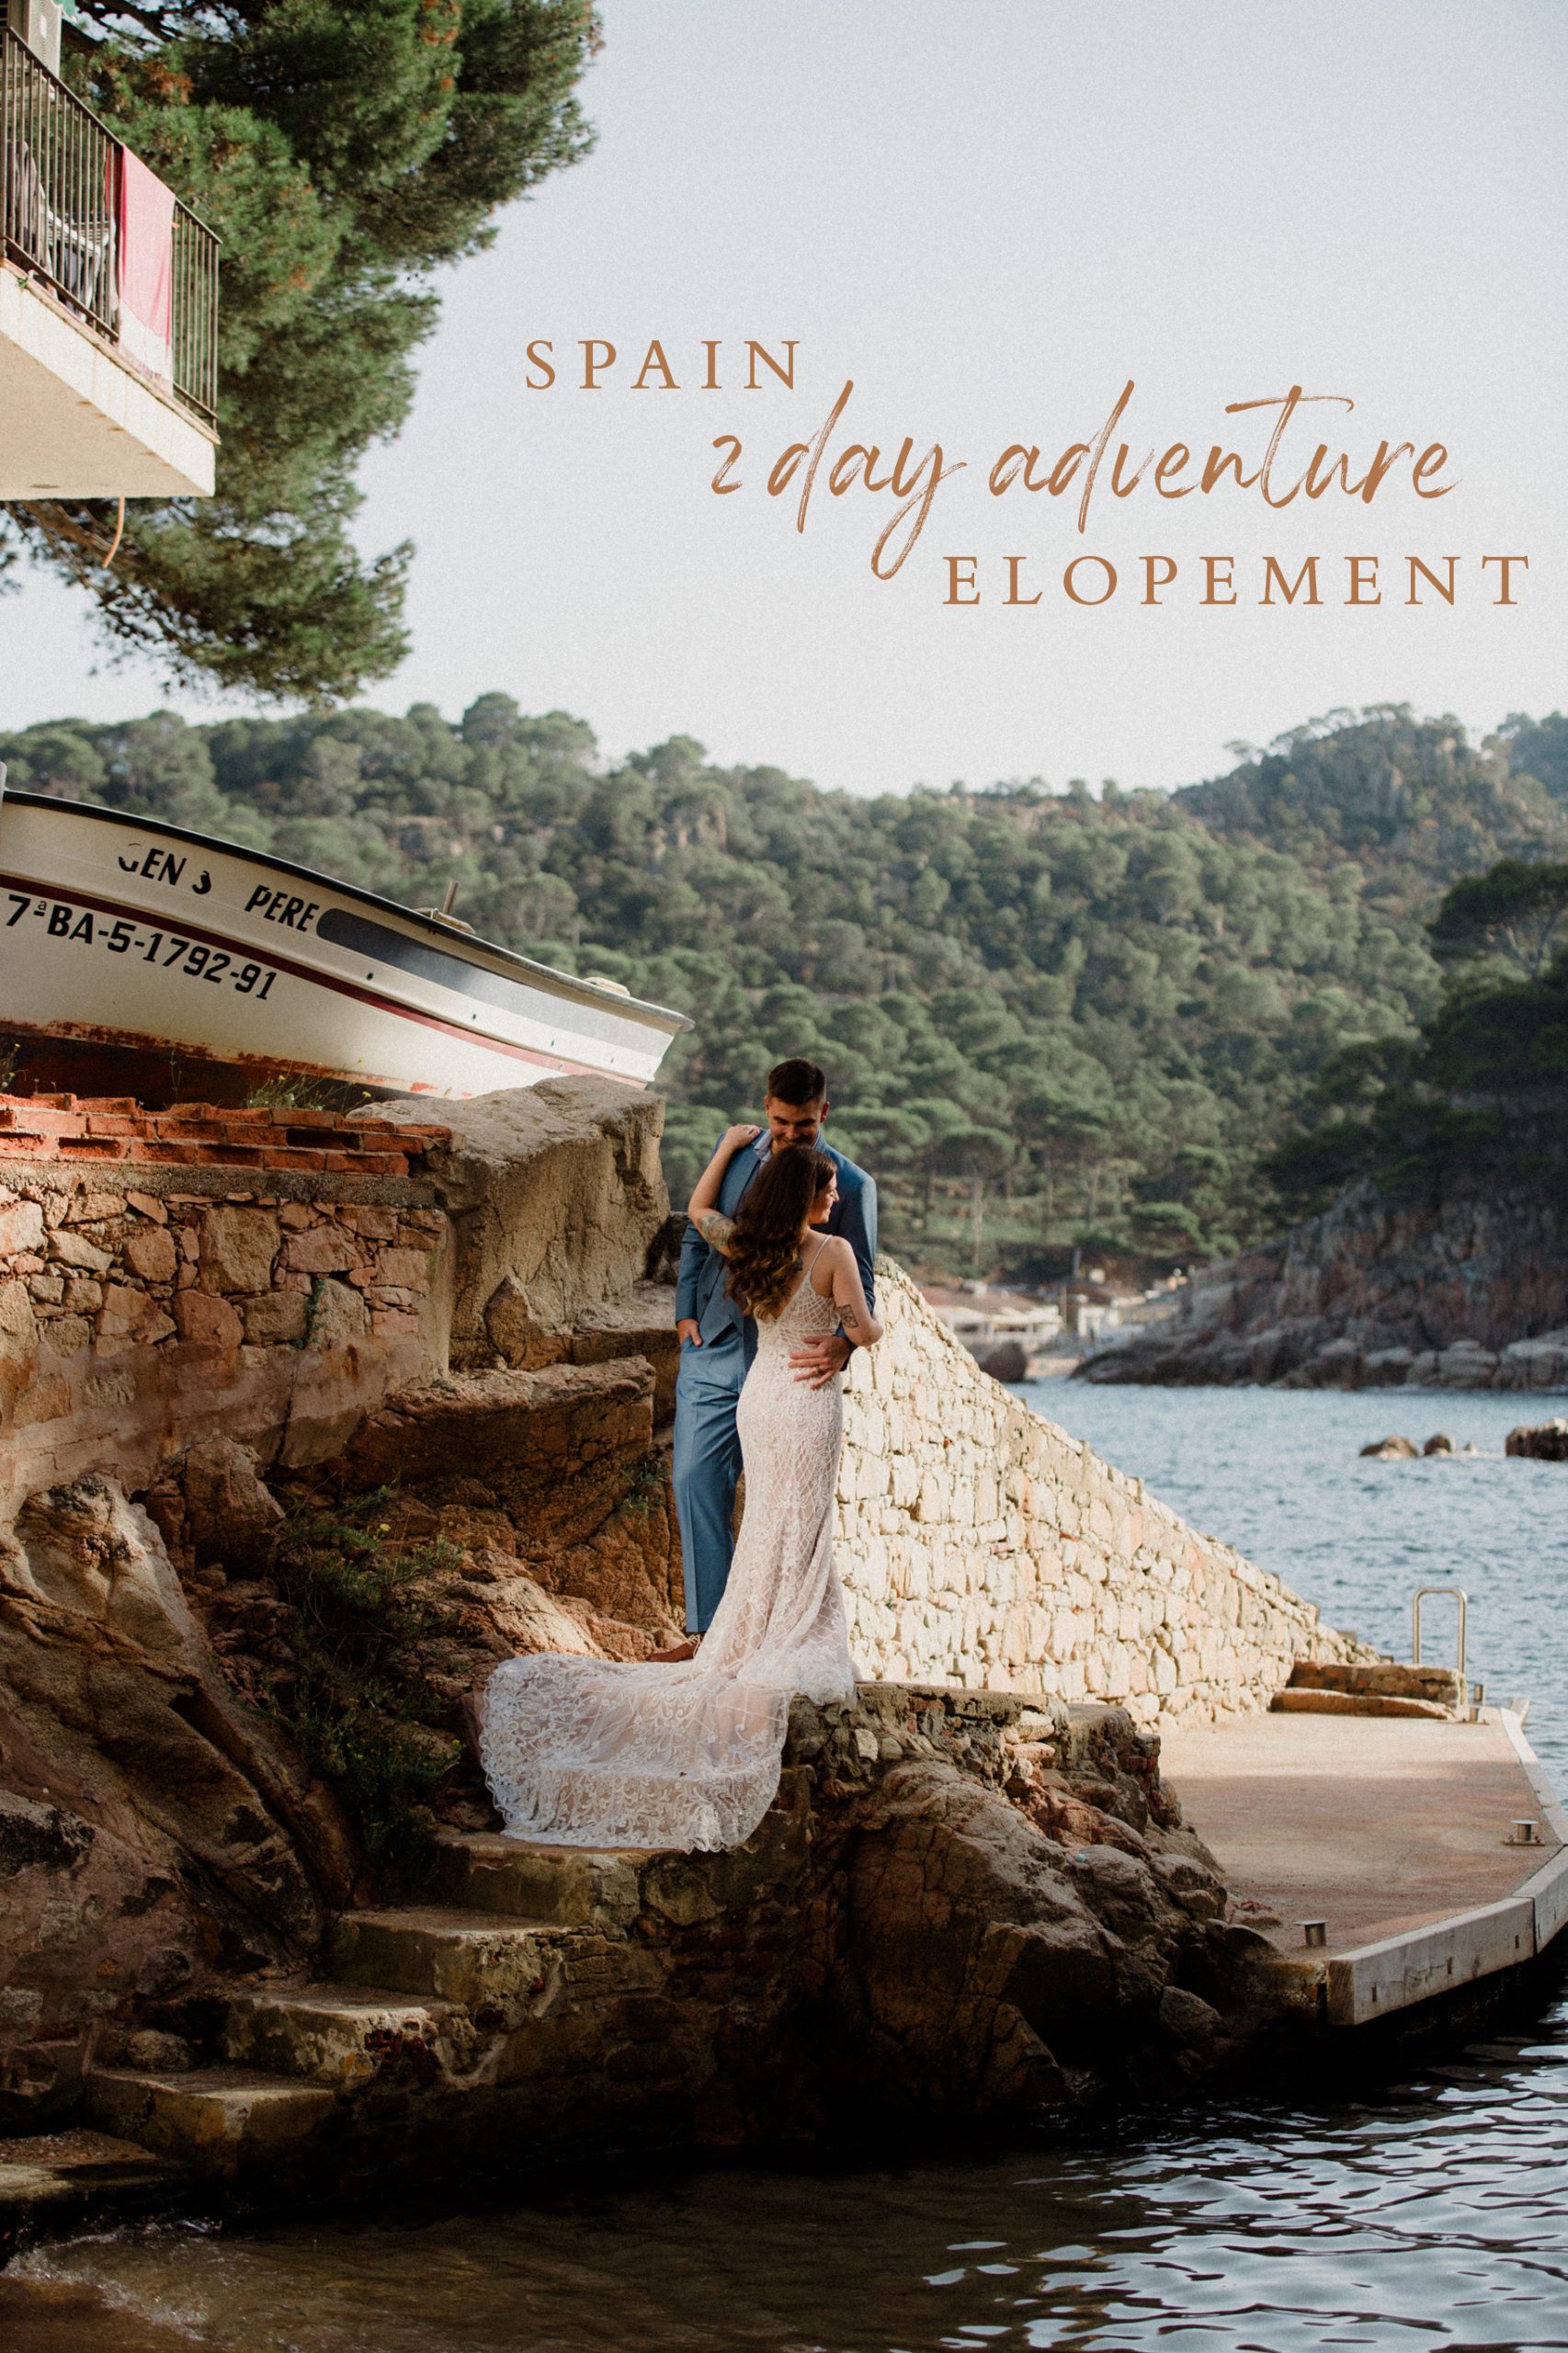 This Costa Brava 2 day Elopement couple spent two days exploring the area and saying vows in the cove of Cala d' Aigua Xelida, Spain. 